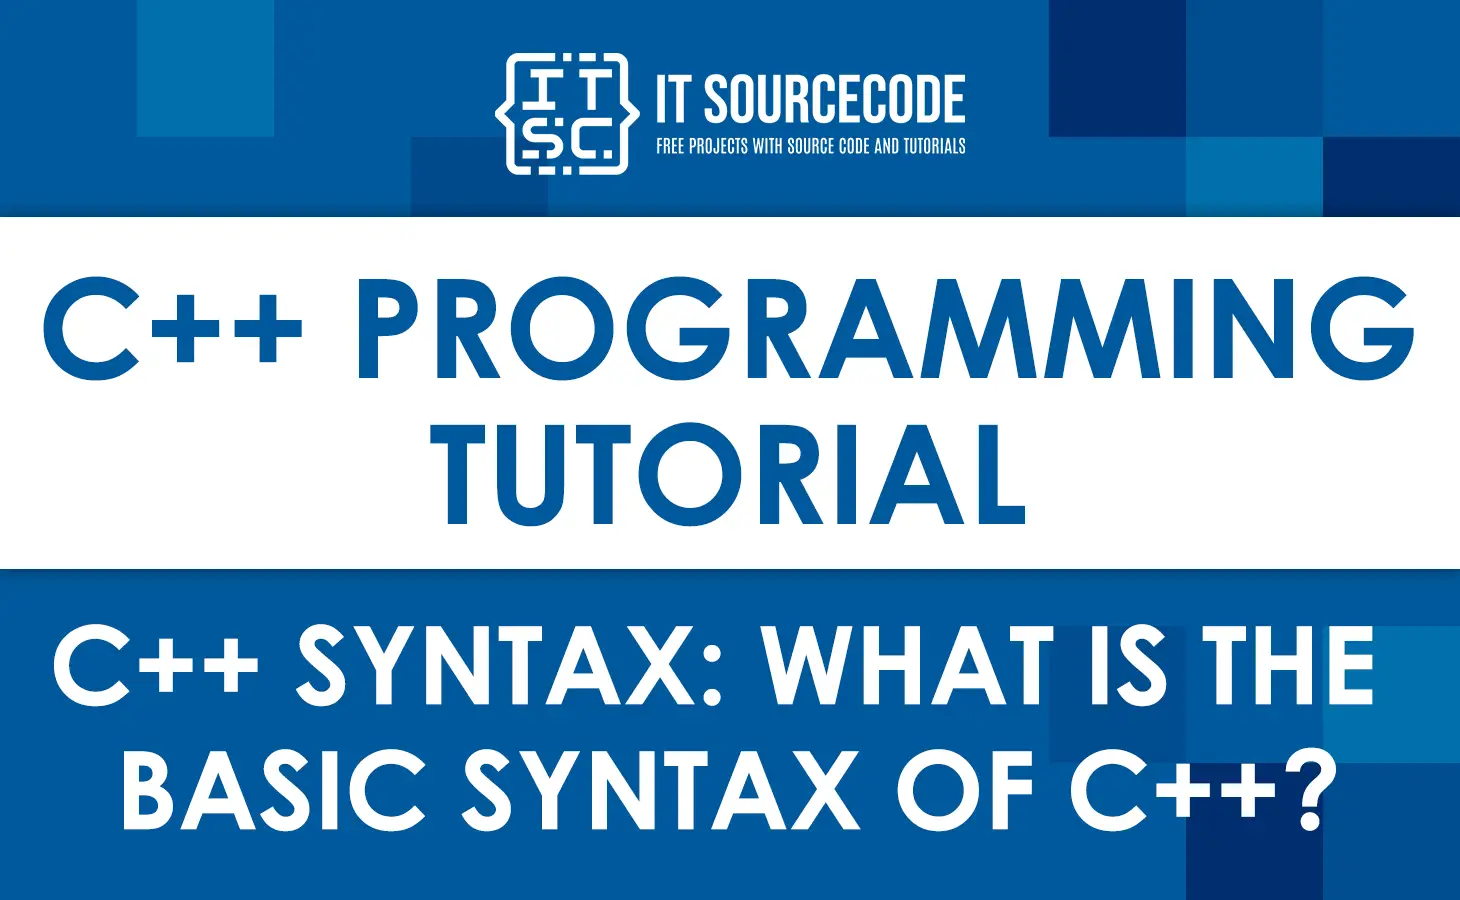 C++ Syntax - What is the basic syntax of C++